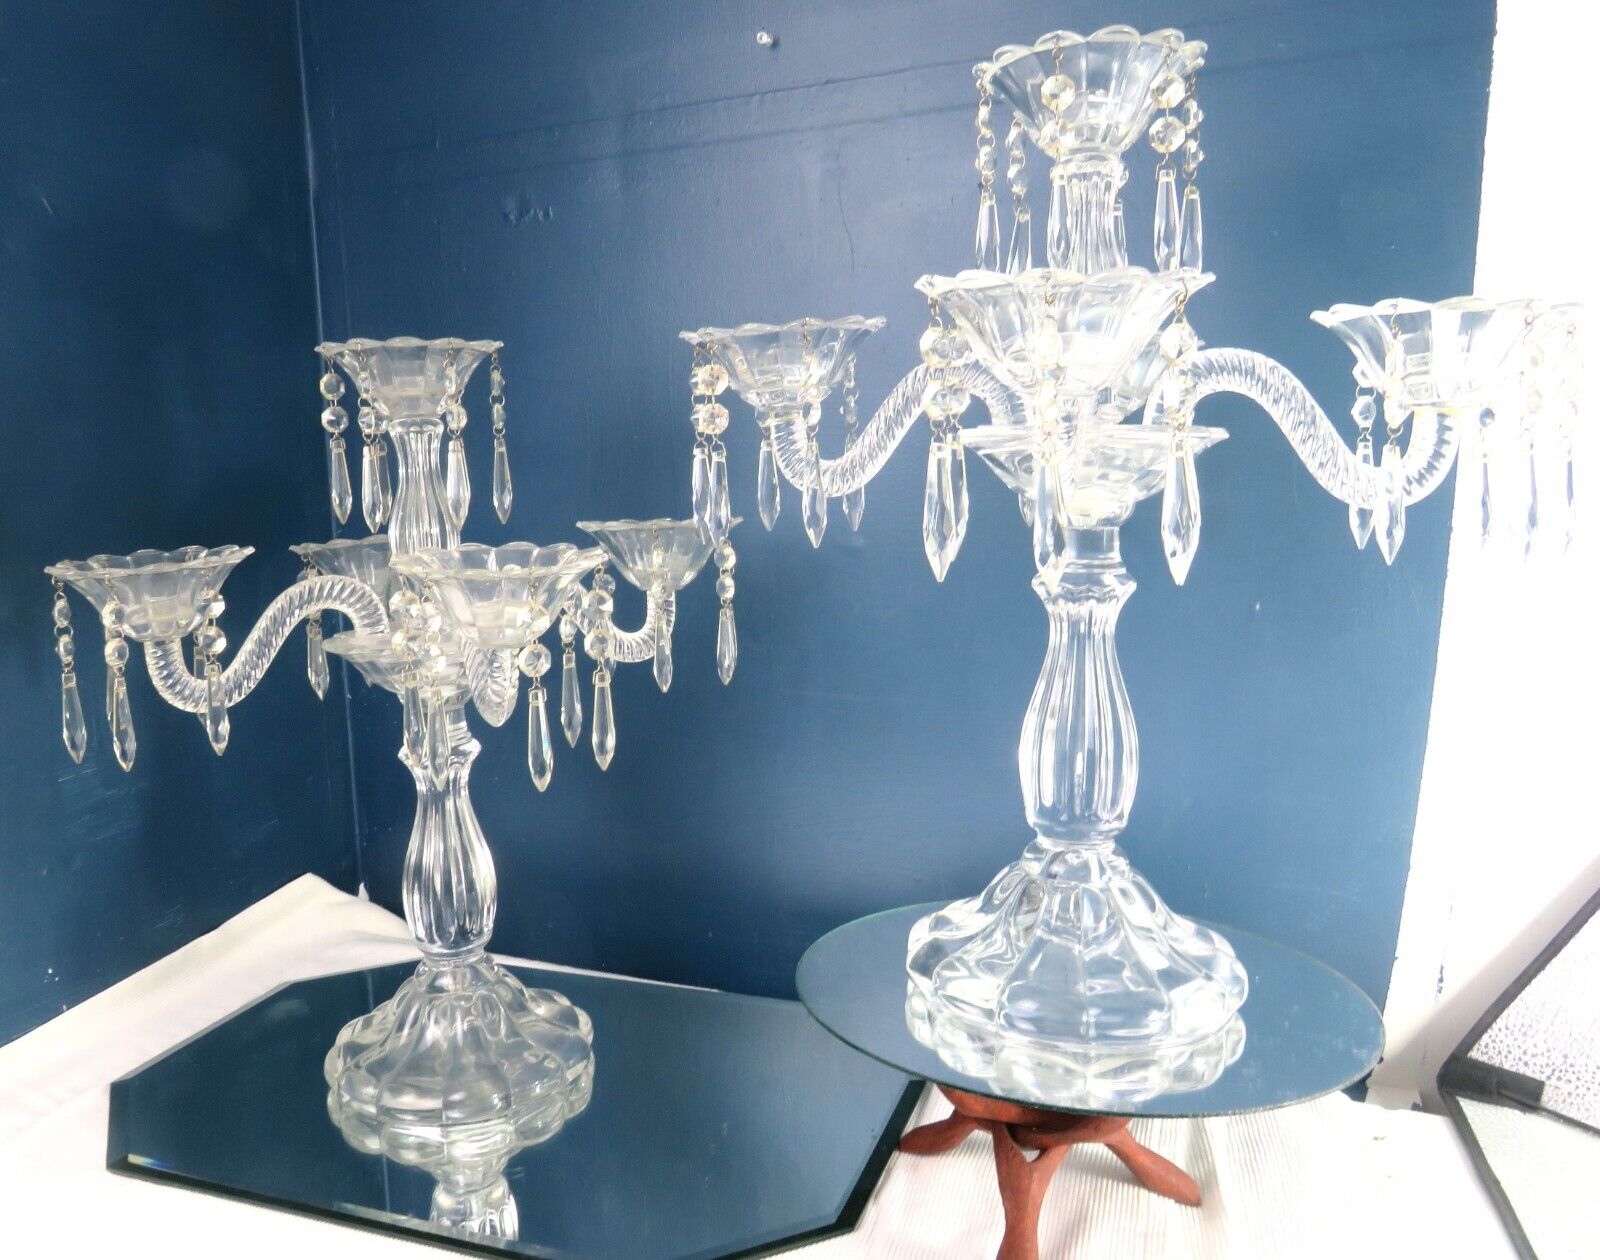 STUNNING AND BEAUTIFUL PAIR OF 5 LITE CRYSTAL CANDLELABRA'S